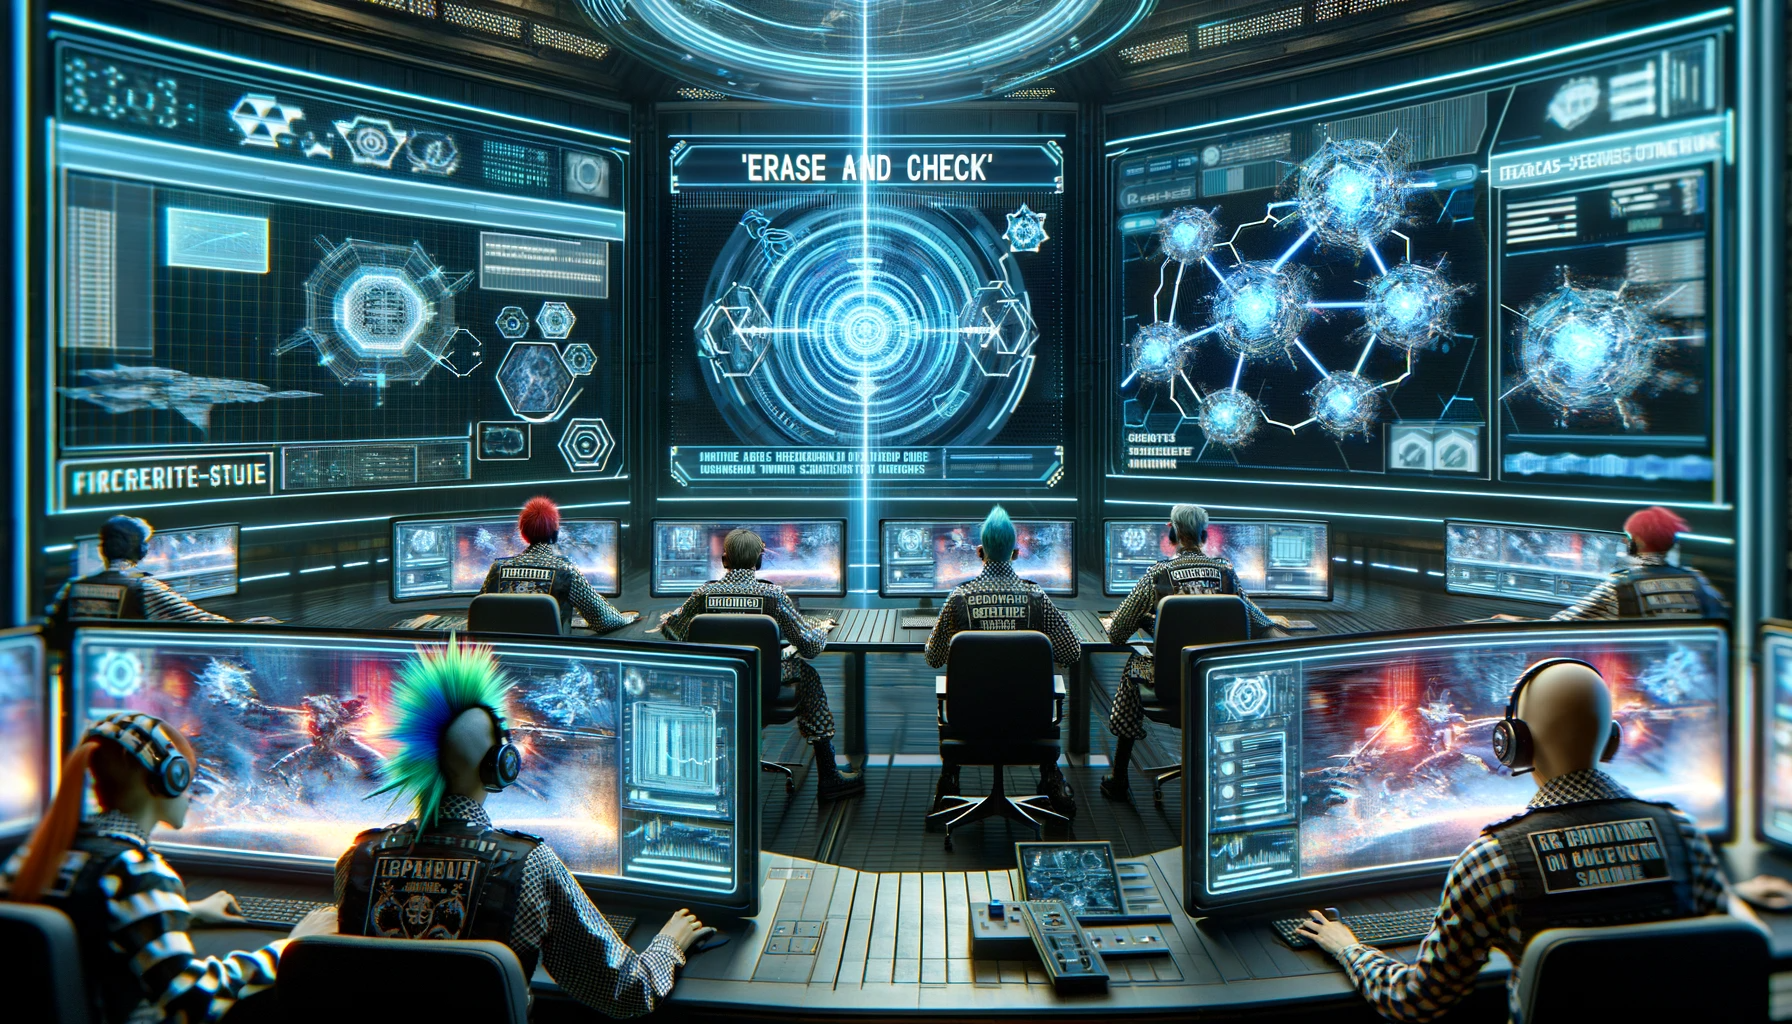 A high-tech, futuristic security room filled with advanced monitors and interfaces. Operators, dressed in punk-inspired uniforms, are intently monitoring screens showing real-time battles between AI systems and adversarial attacks. The central screen highlights the 